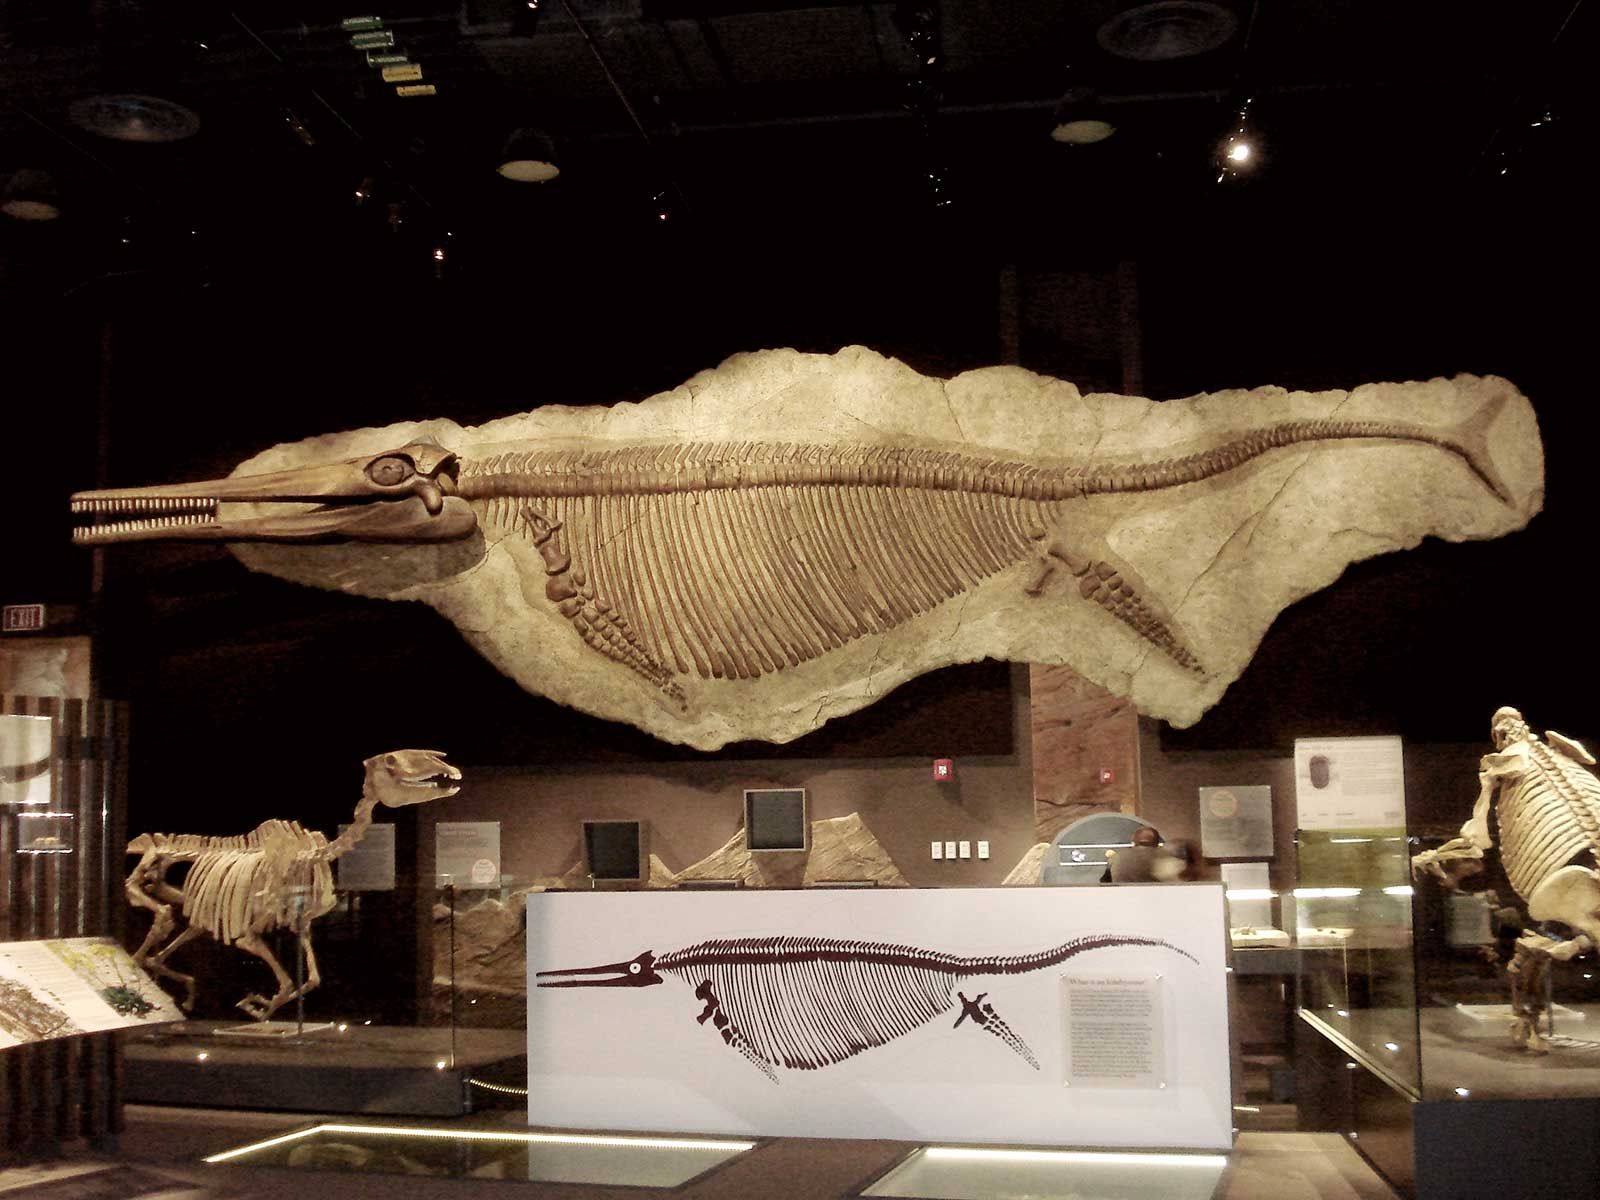 Whale-Sized Marine Reptiles Once Ruled the Seas